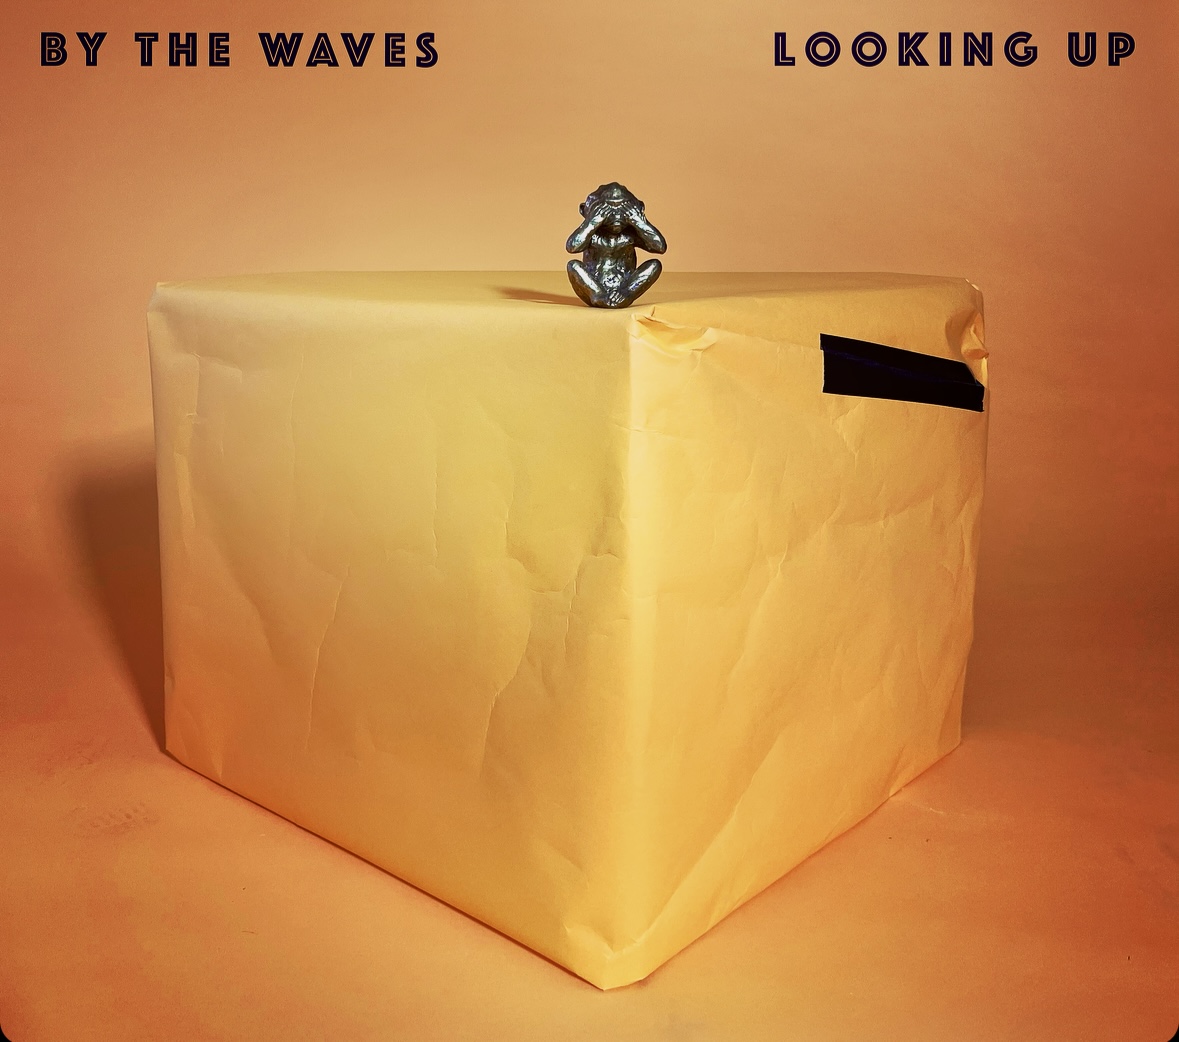 DEBUT SINGLE: “Looking Up” by By the Waves